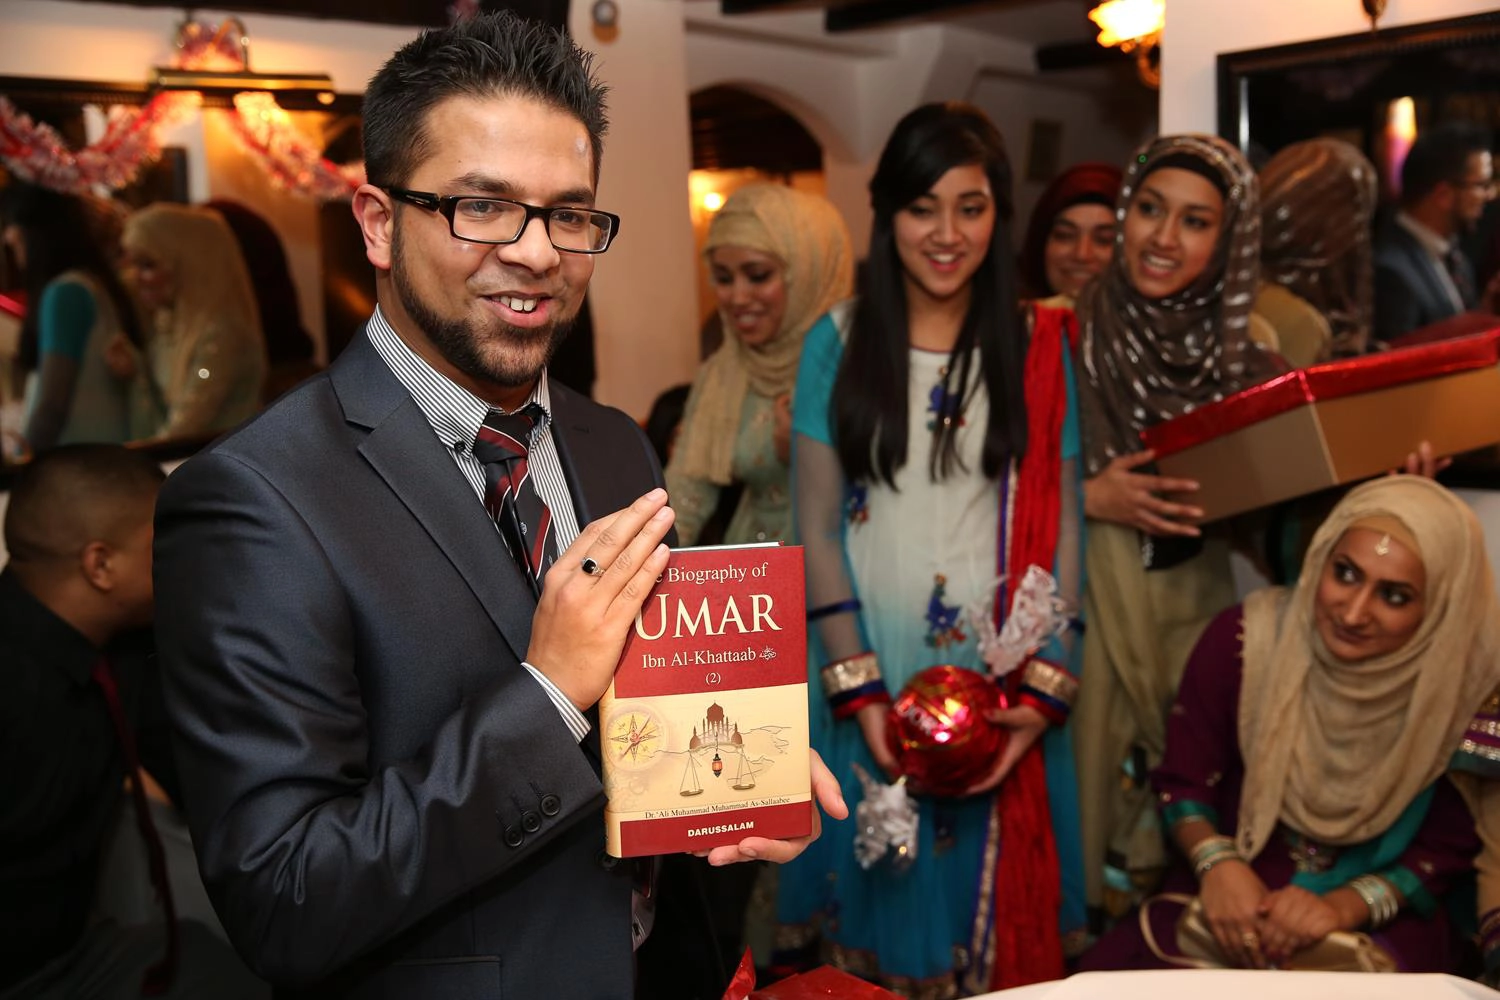 Bengali Engagement Photography Umar Ibn Al-Khattab book gift in London by MAKSAM Photography